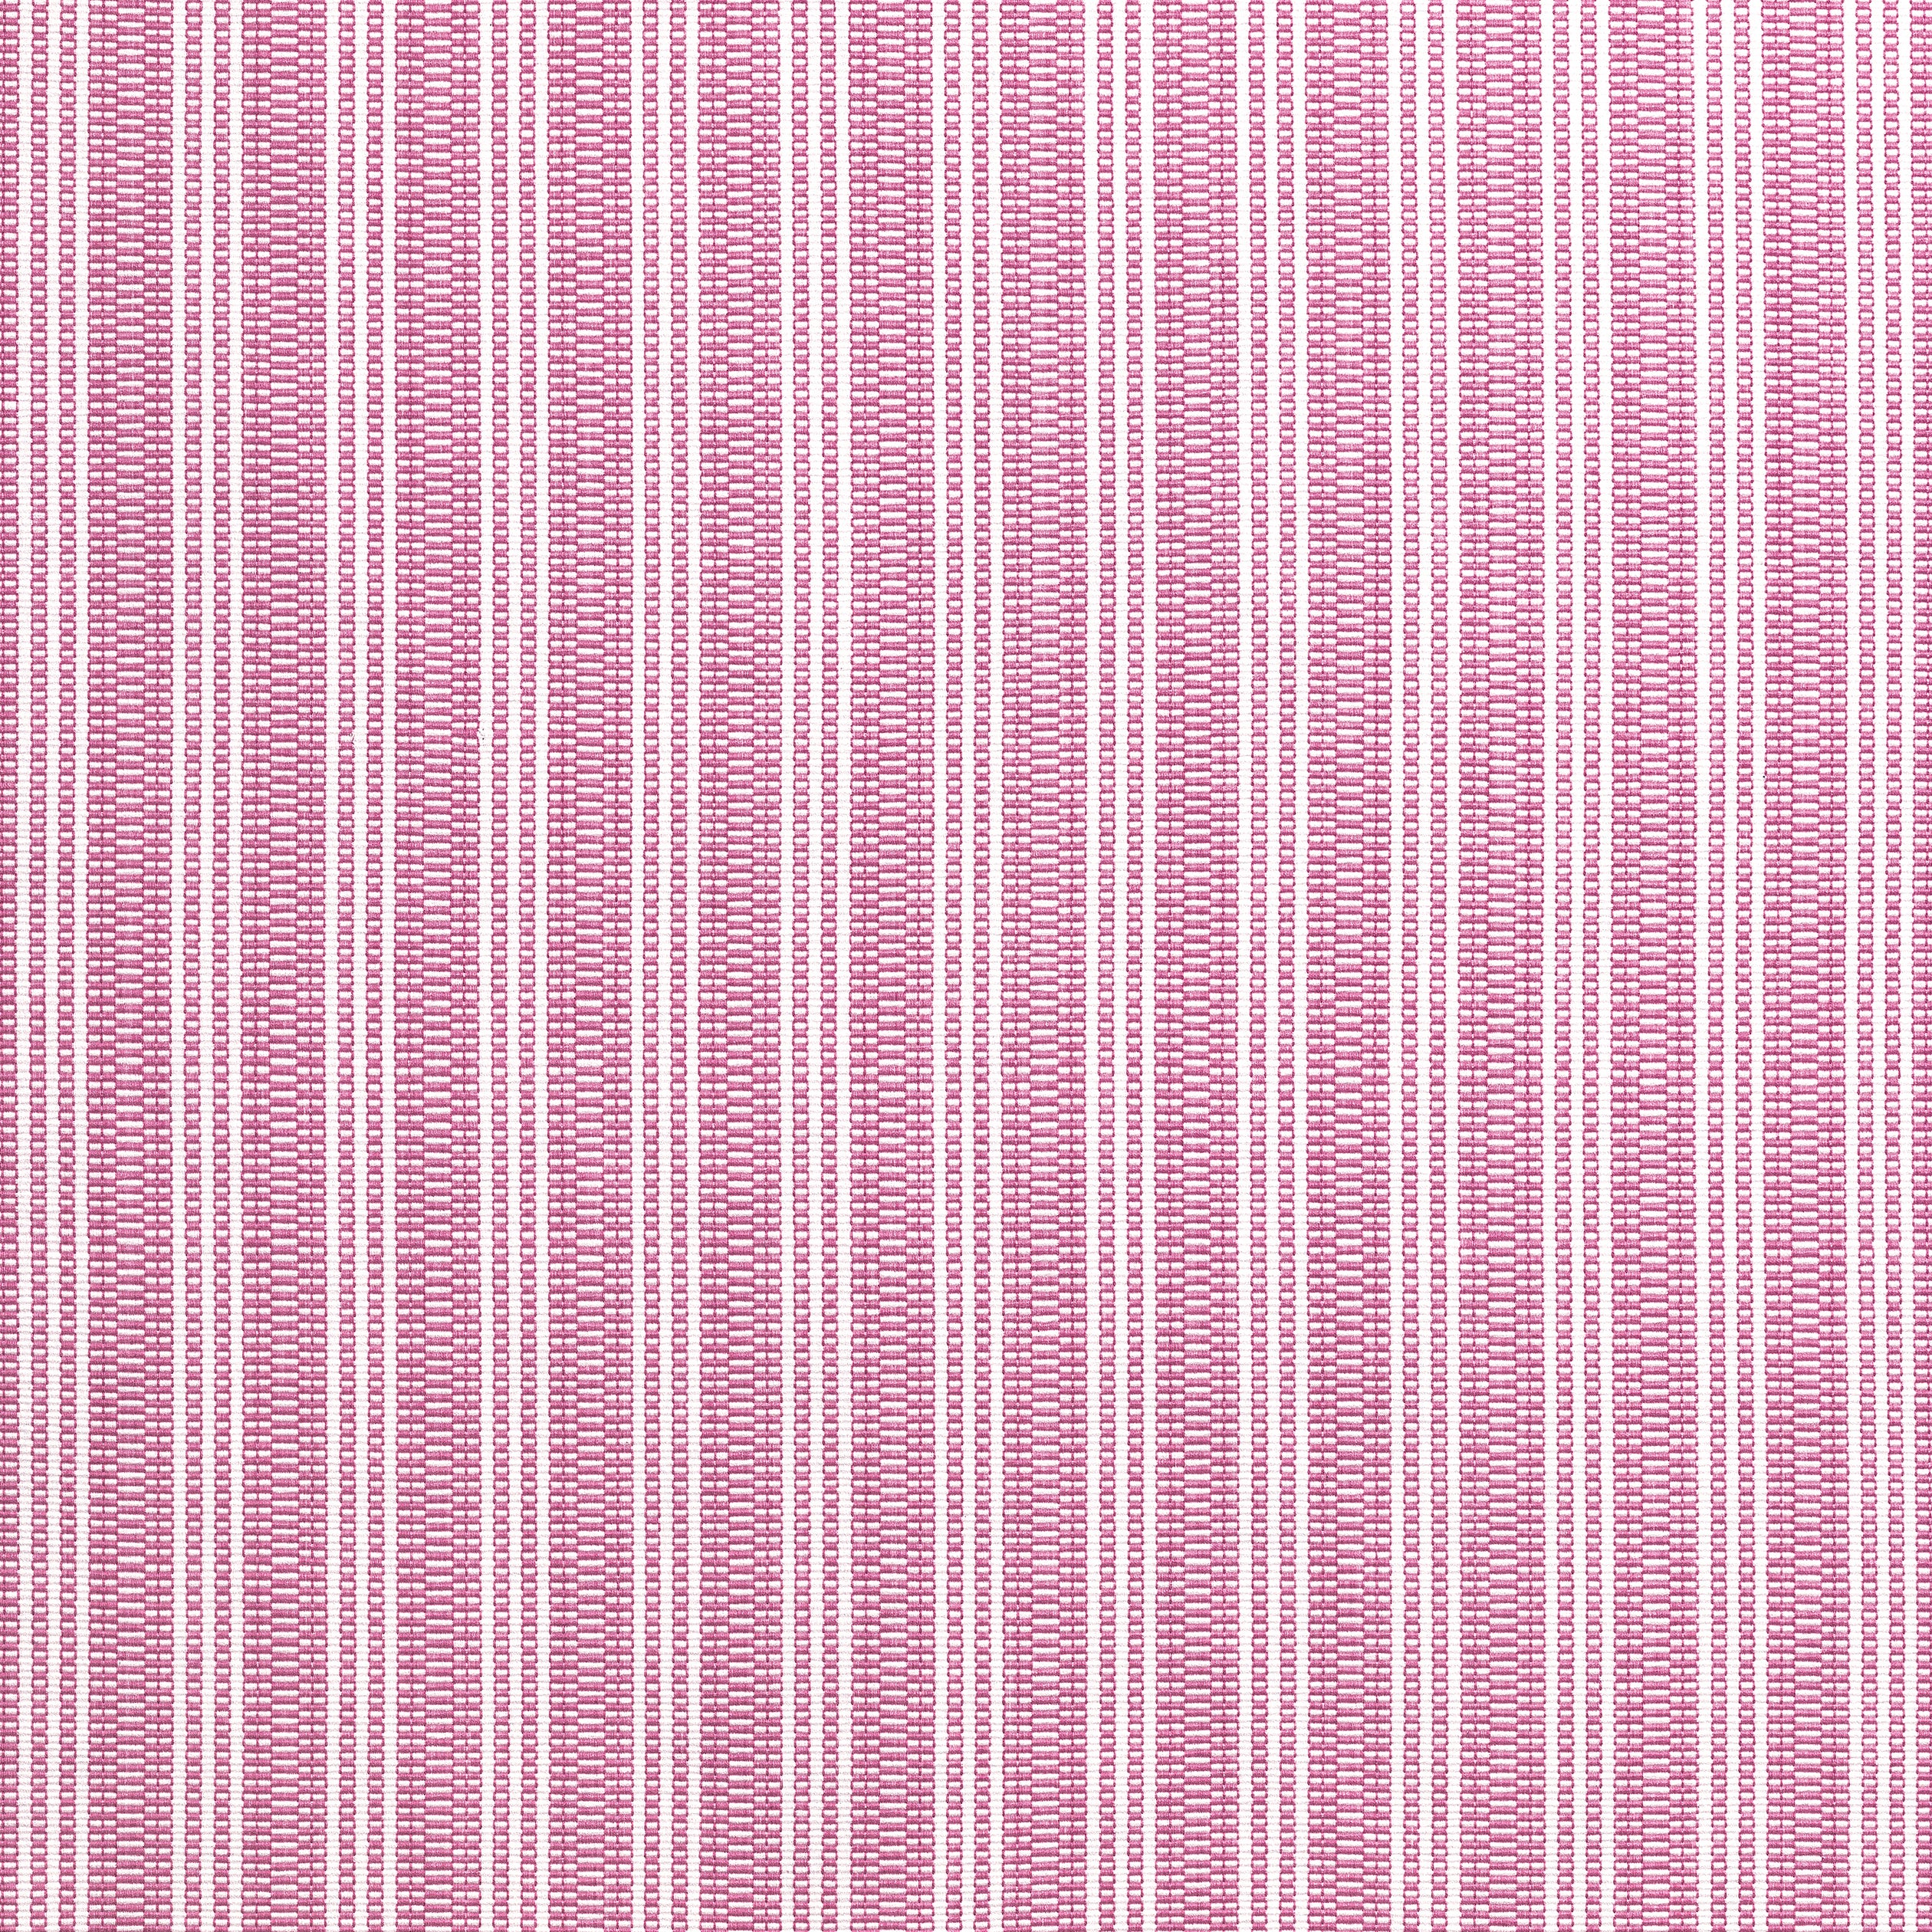 Reed Stripe fabric in fuchsia color - pattern number AW9849 - by Anna French in the Nara collection